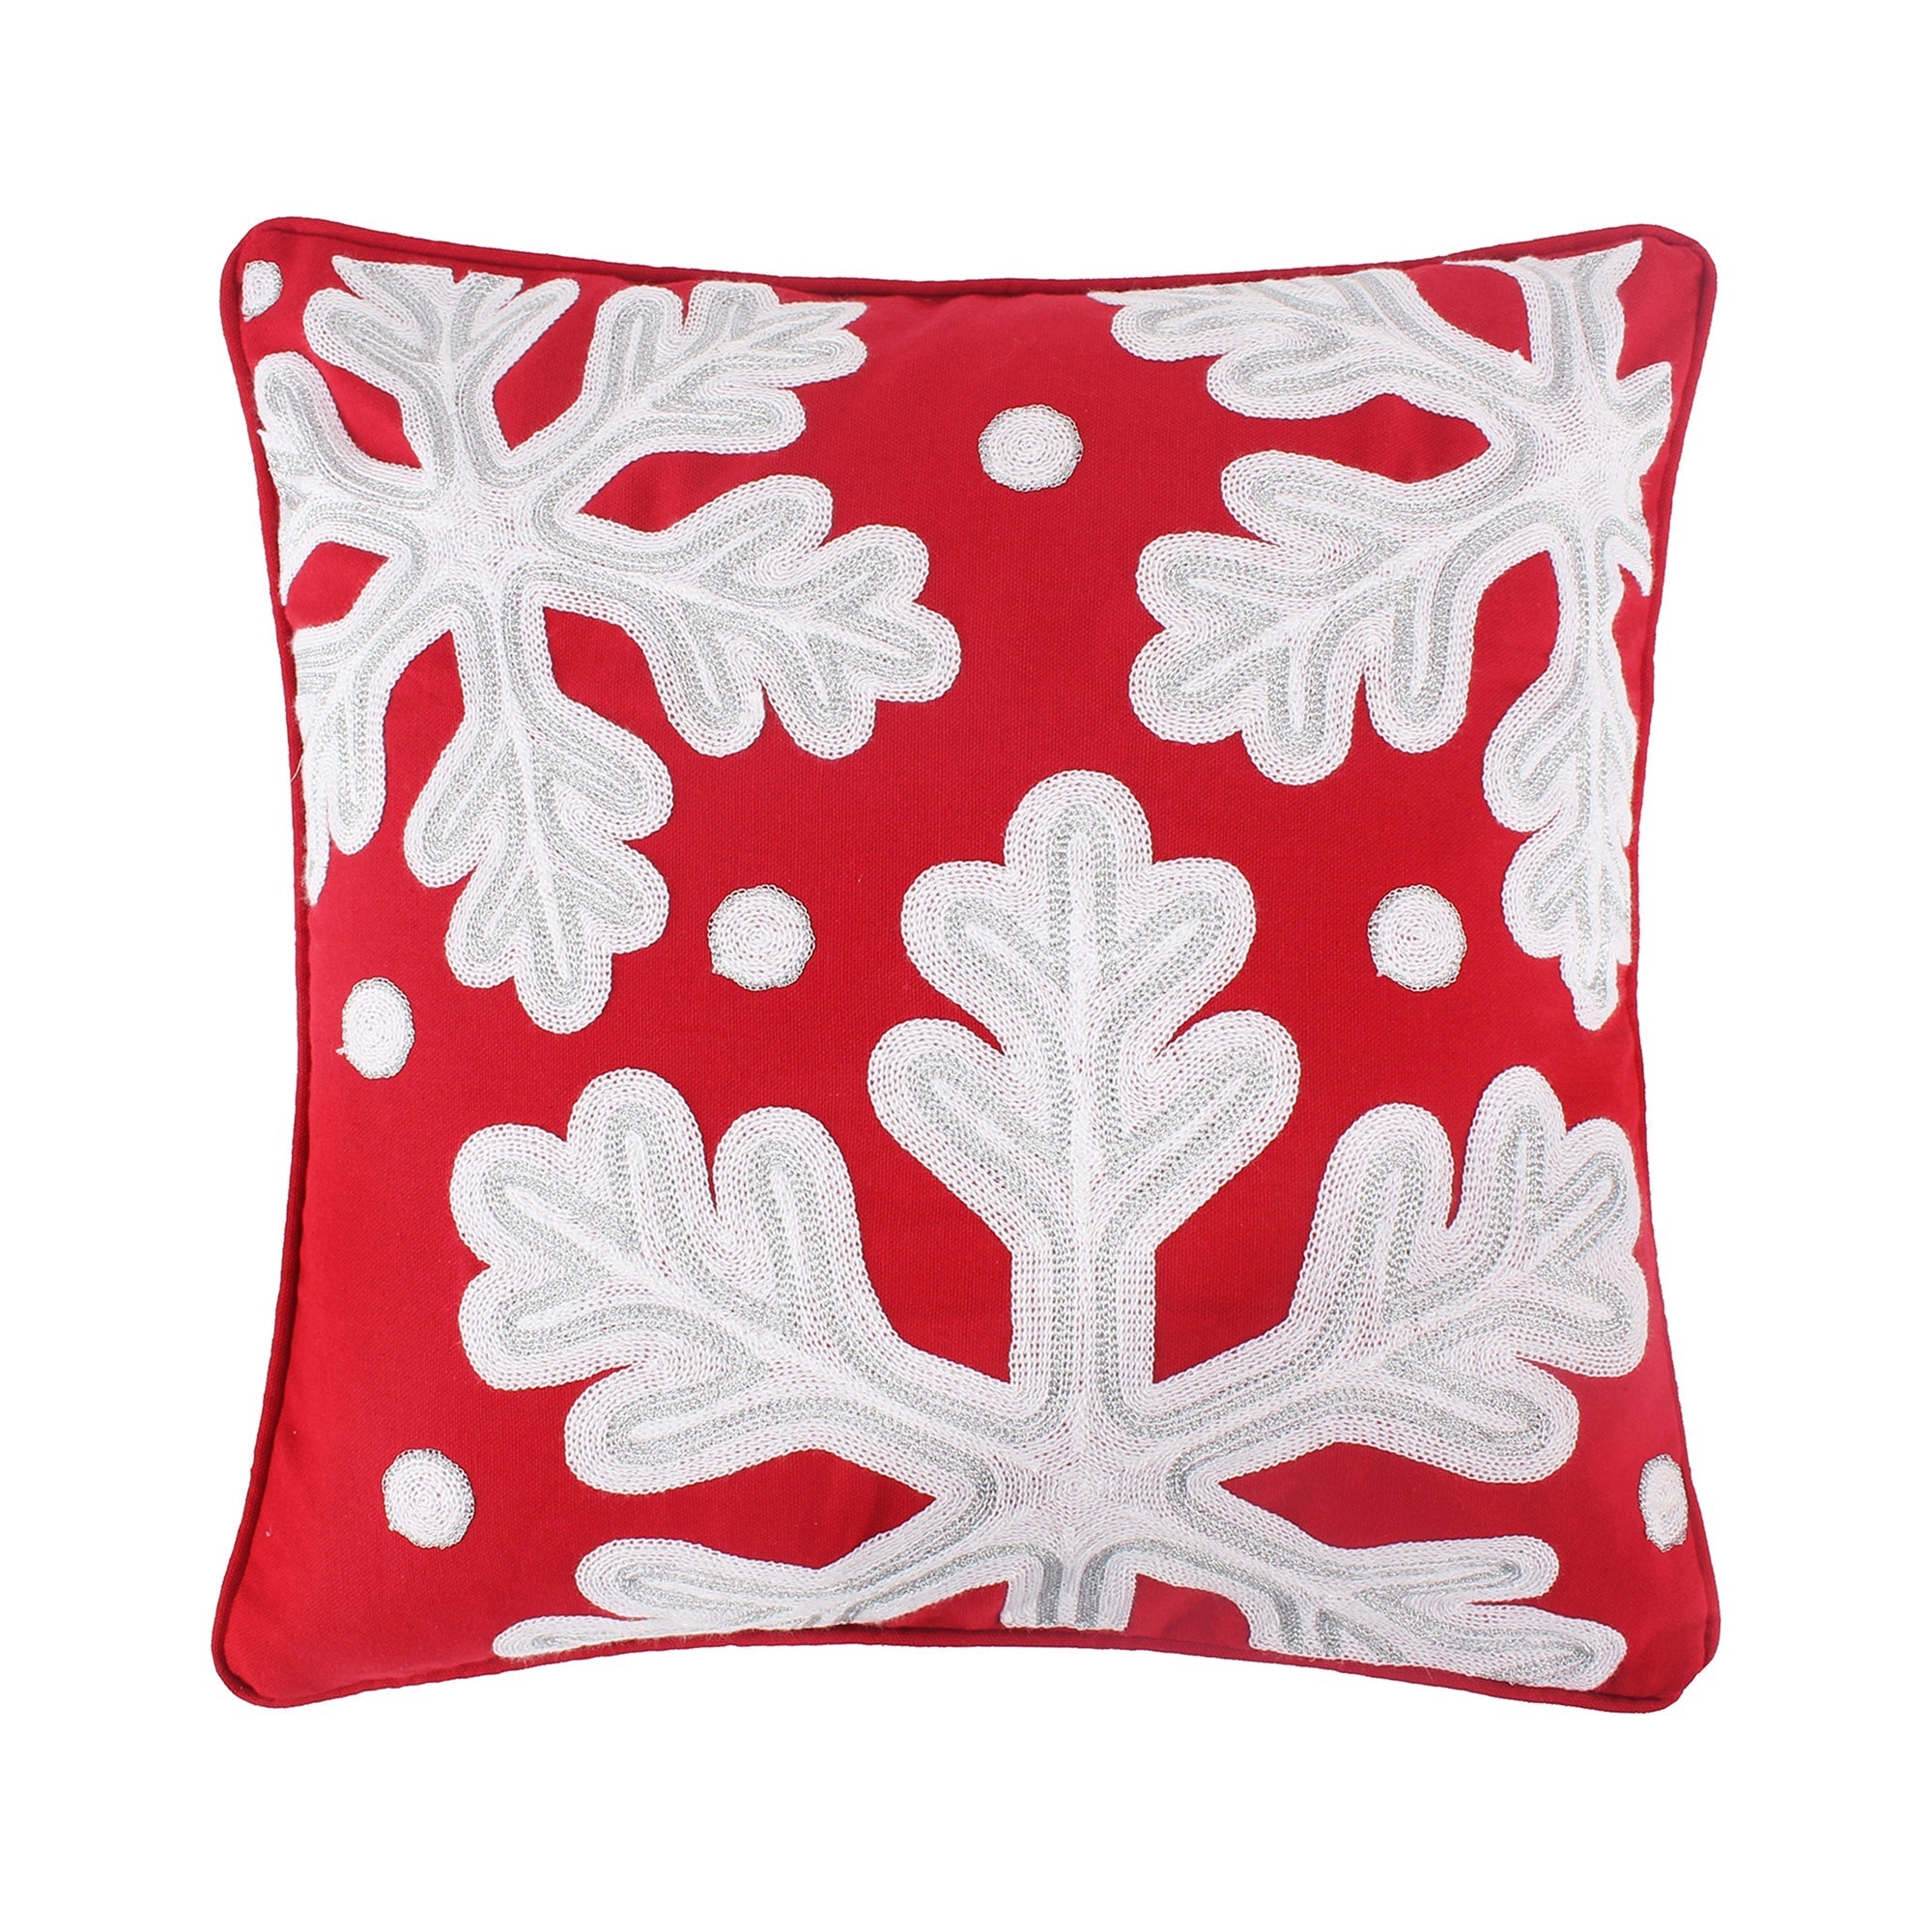 2 Piece Christmas Set Cushioned Anti Fatigue Rustic red Snowflake